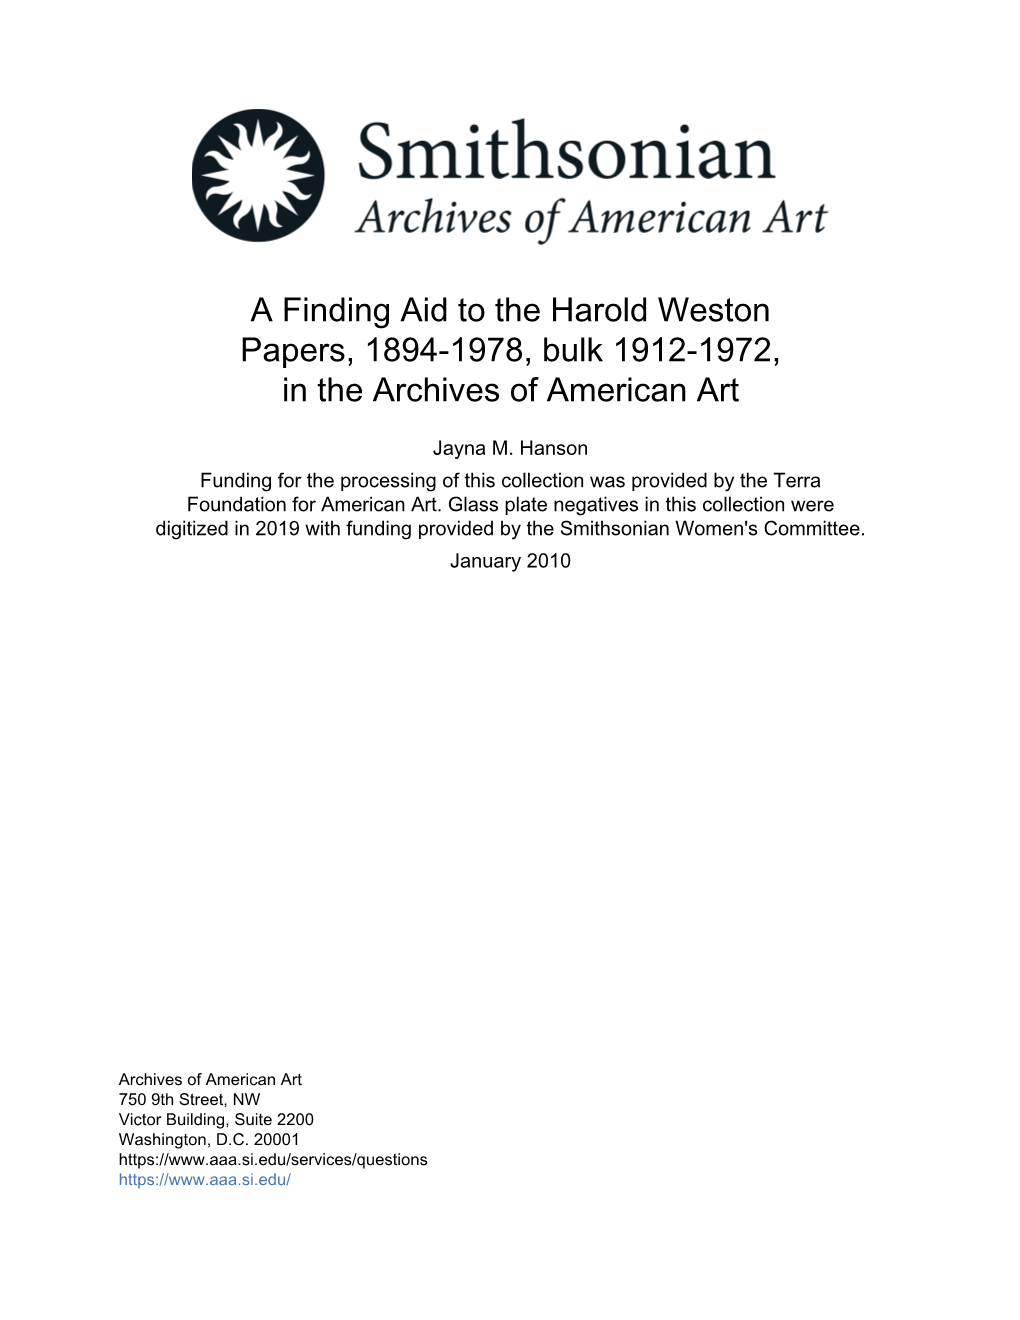 A Finding Aid to the Harold Weston Papers, 1894-1978, Bulk 1912-1972, in the Archives of American Art